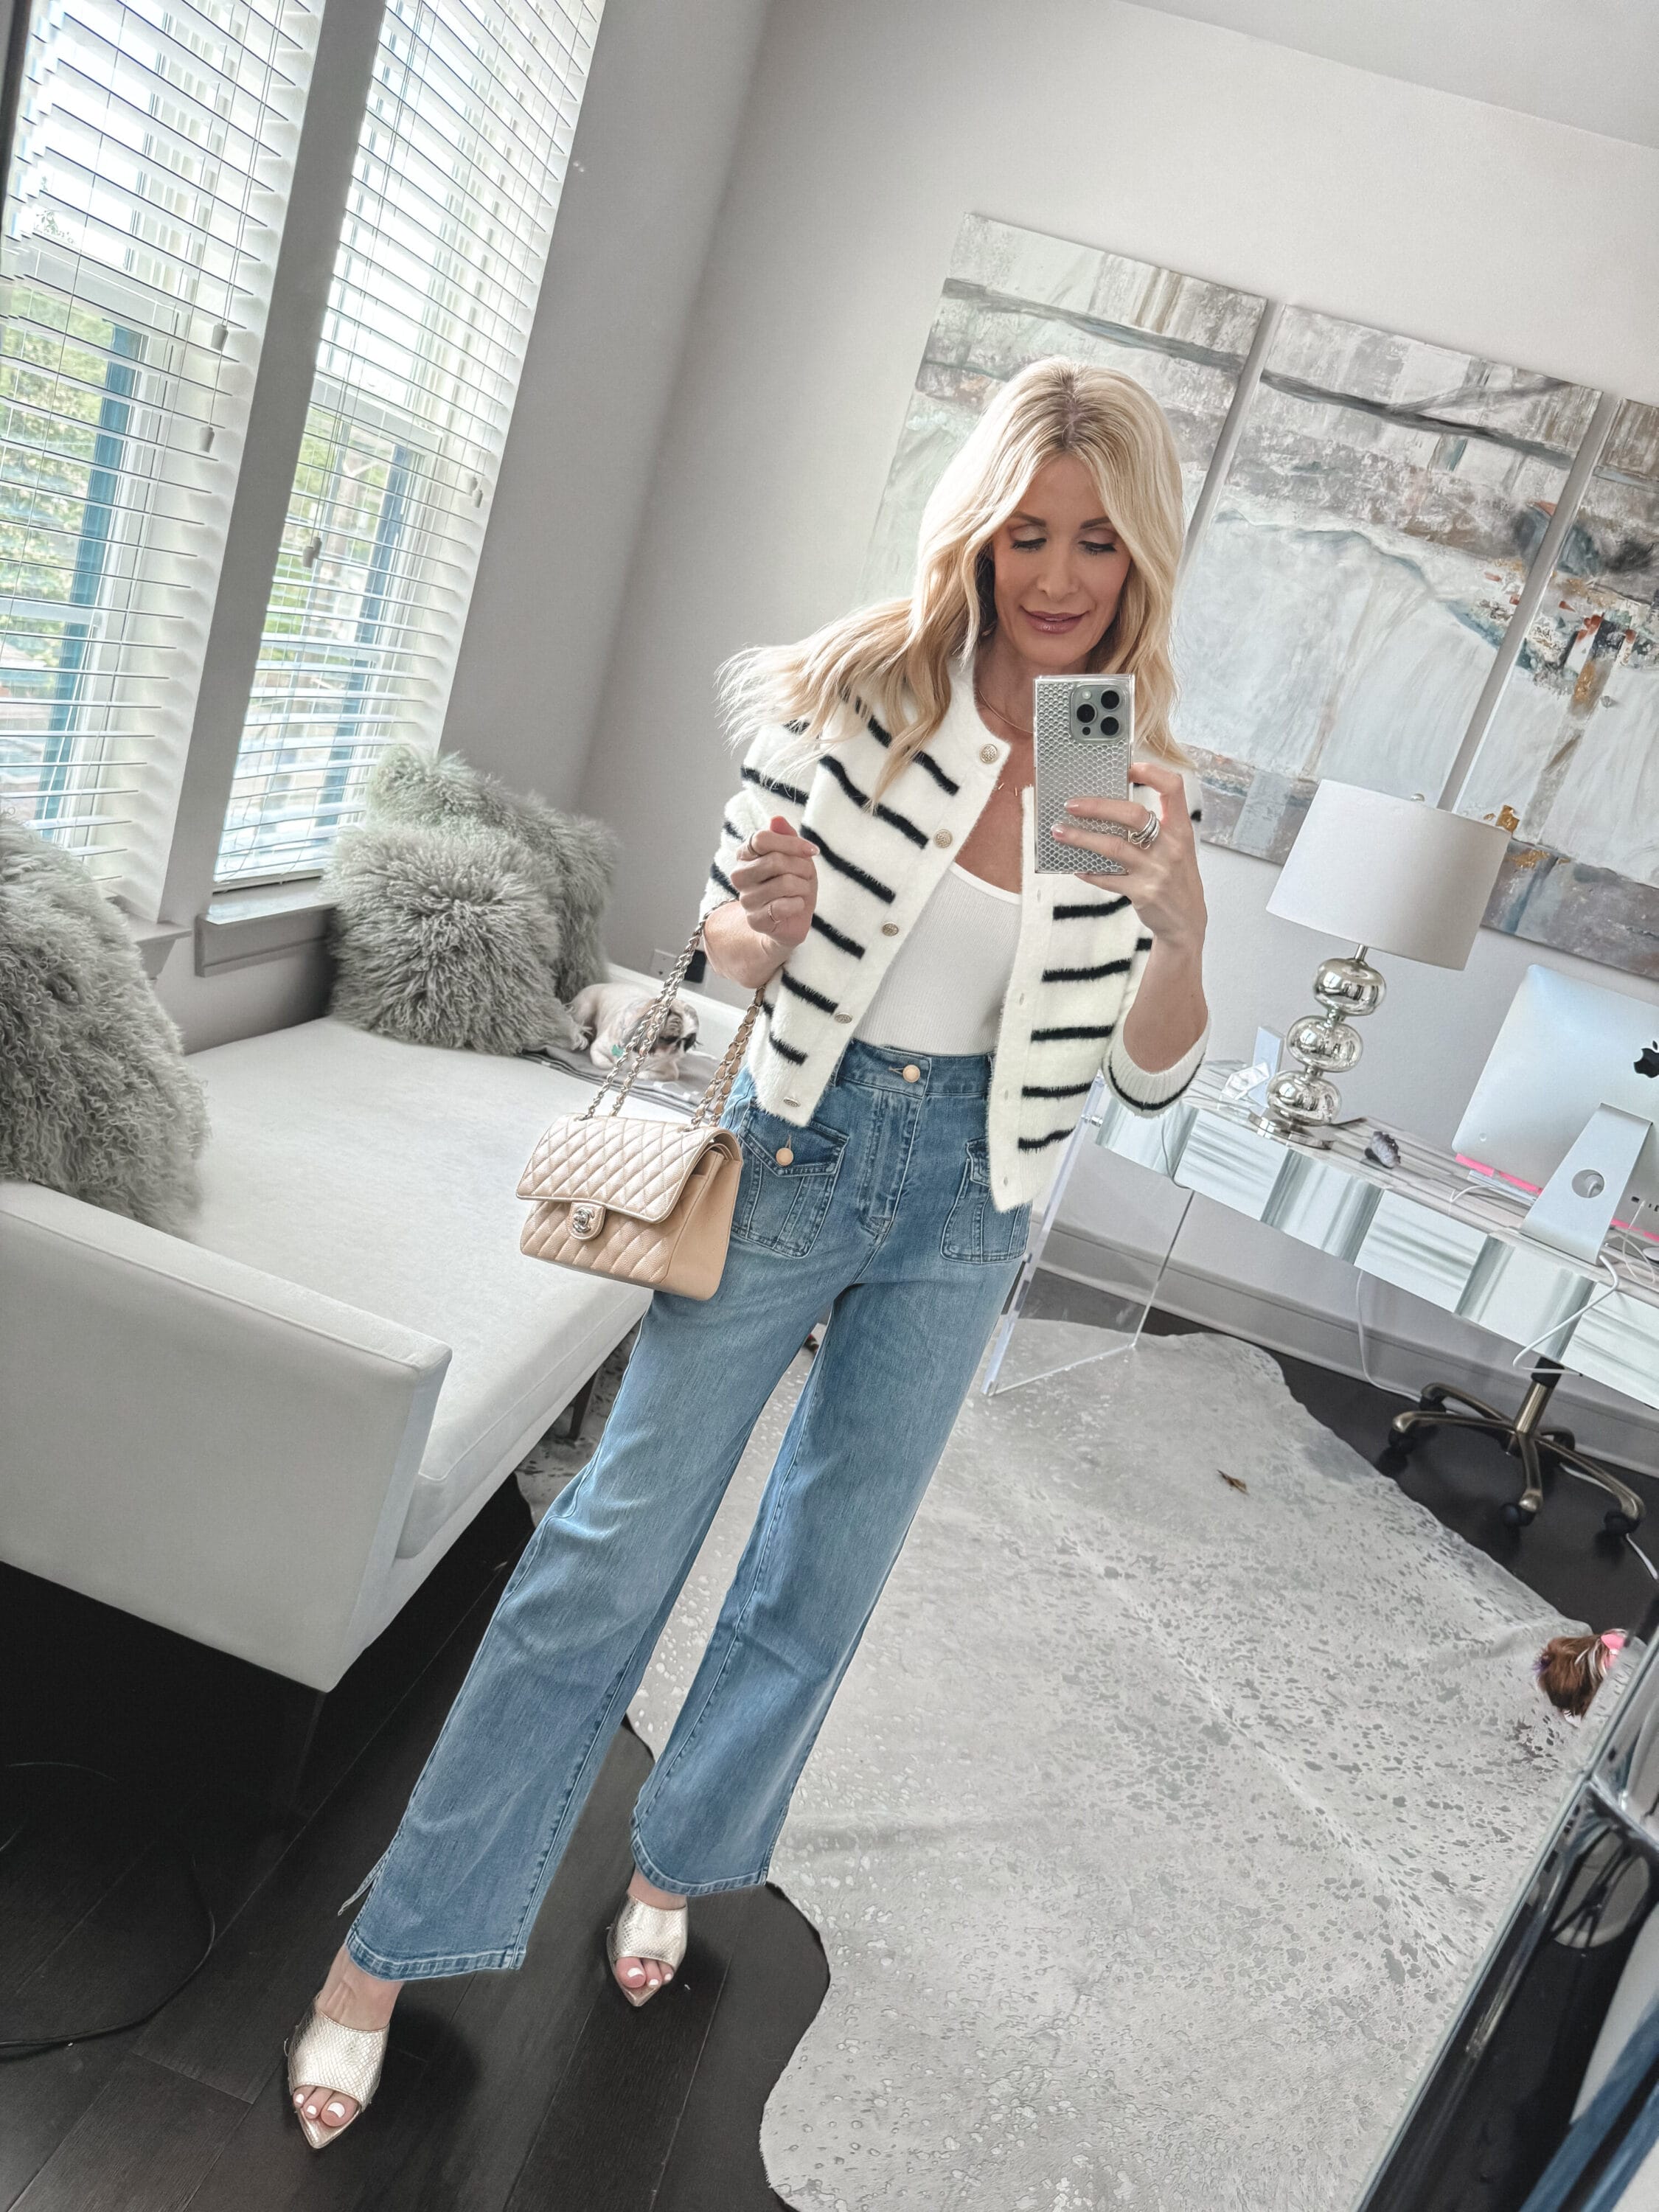 Over 40 fashion blogger wearing a striped cardigan with straight leg jeans and gold accessories as one of 5 stylish spring looks.